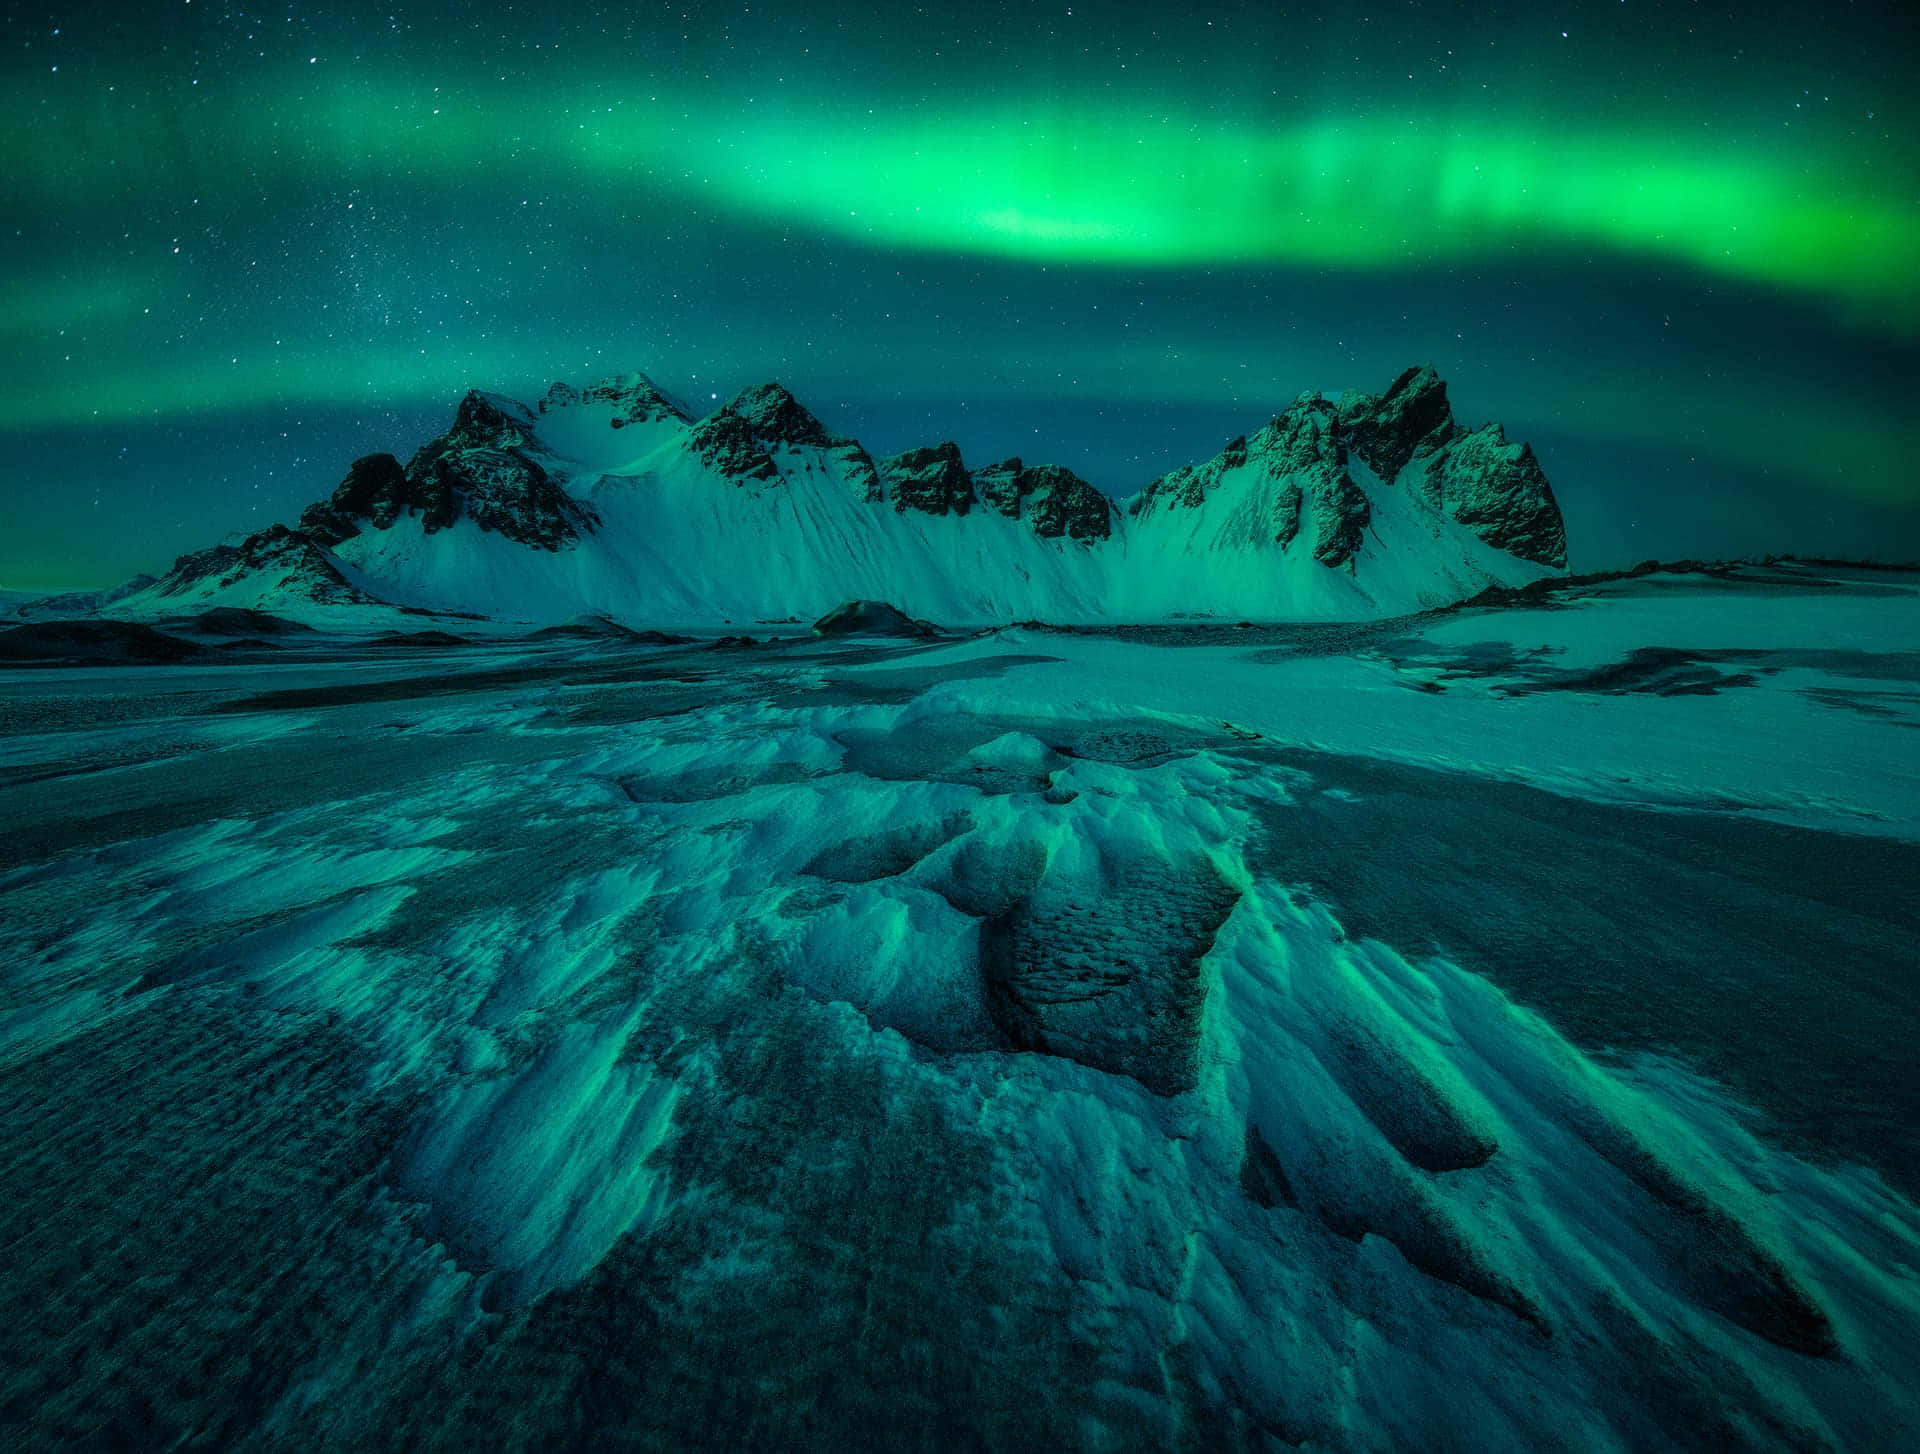 "Revel in the wonderment of the captivating Northern Lights"